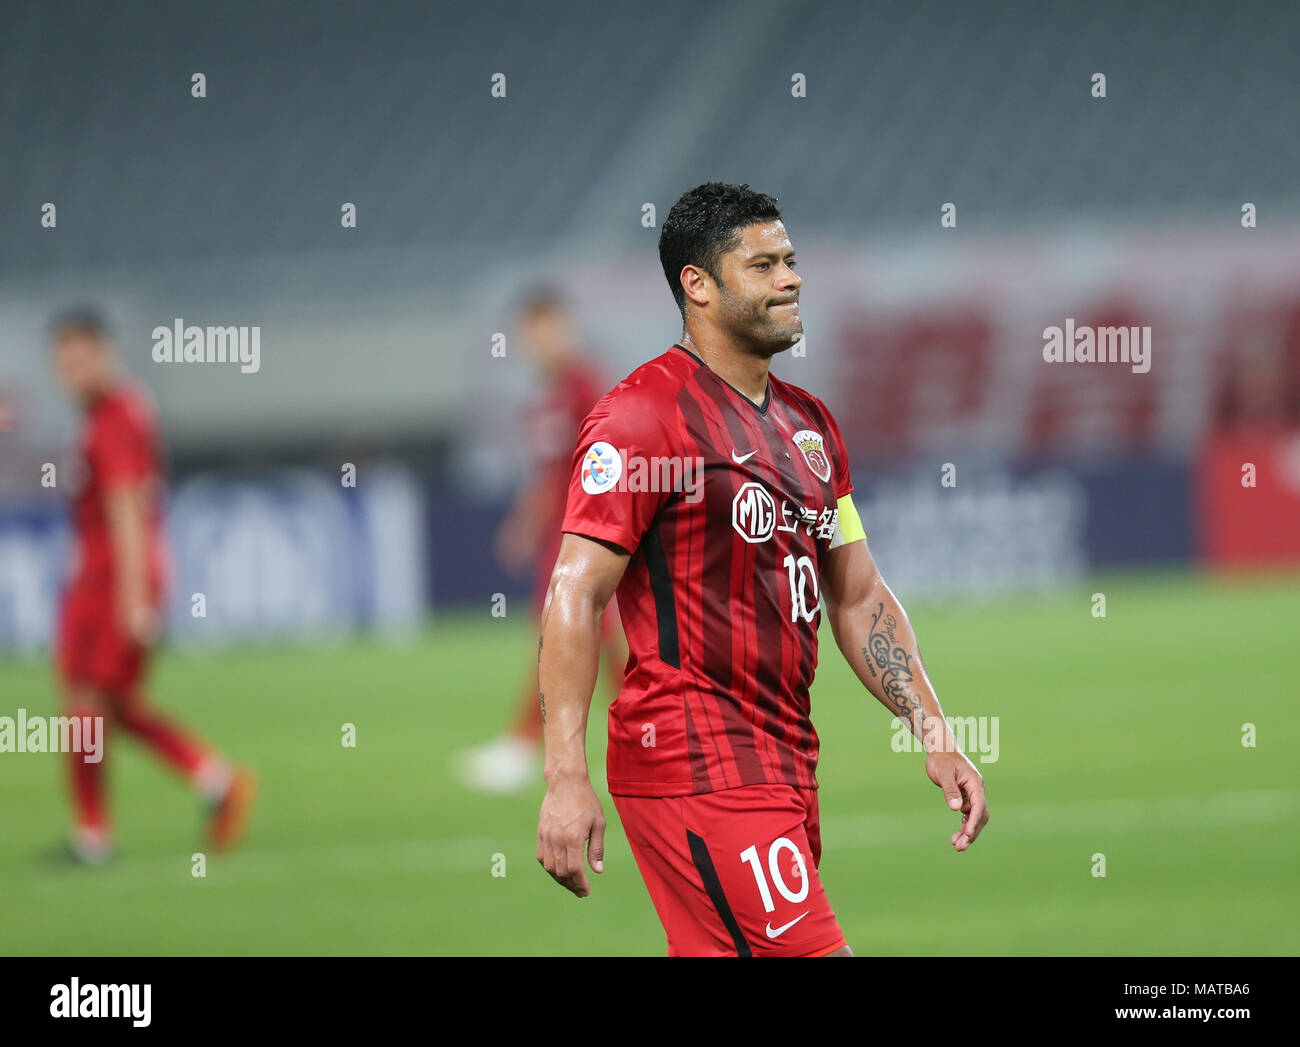 Shanghai, China. 4th Apr, 2018. Hulk of Shanghai SIPG FC reacts during the AFC Champions League group F soccer match between China's Shanghai SIPG FC and Japan's Kawasaki Frontale in Shanghai, east China, April 4, 2018. The match ended in a 1-1 draw. Credit: Ding Ting/Xinhua/Alamy Live News Stock Photo